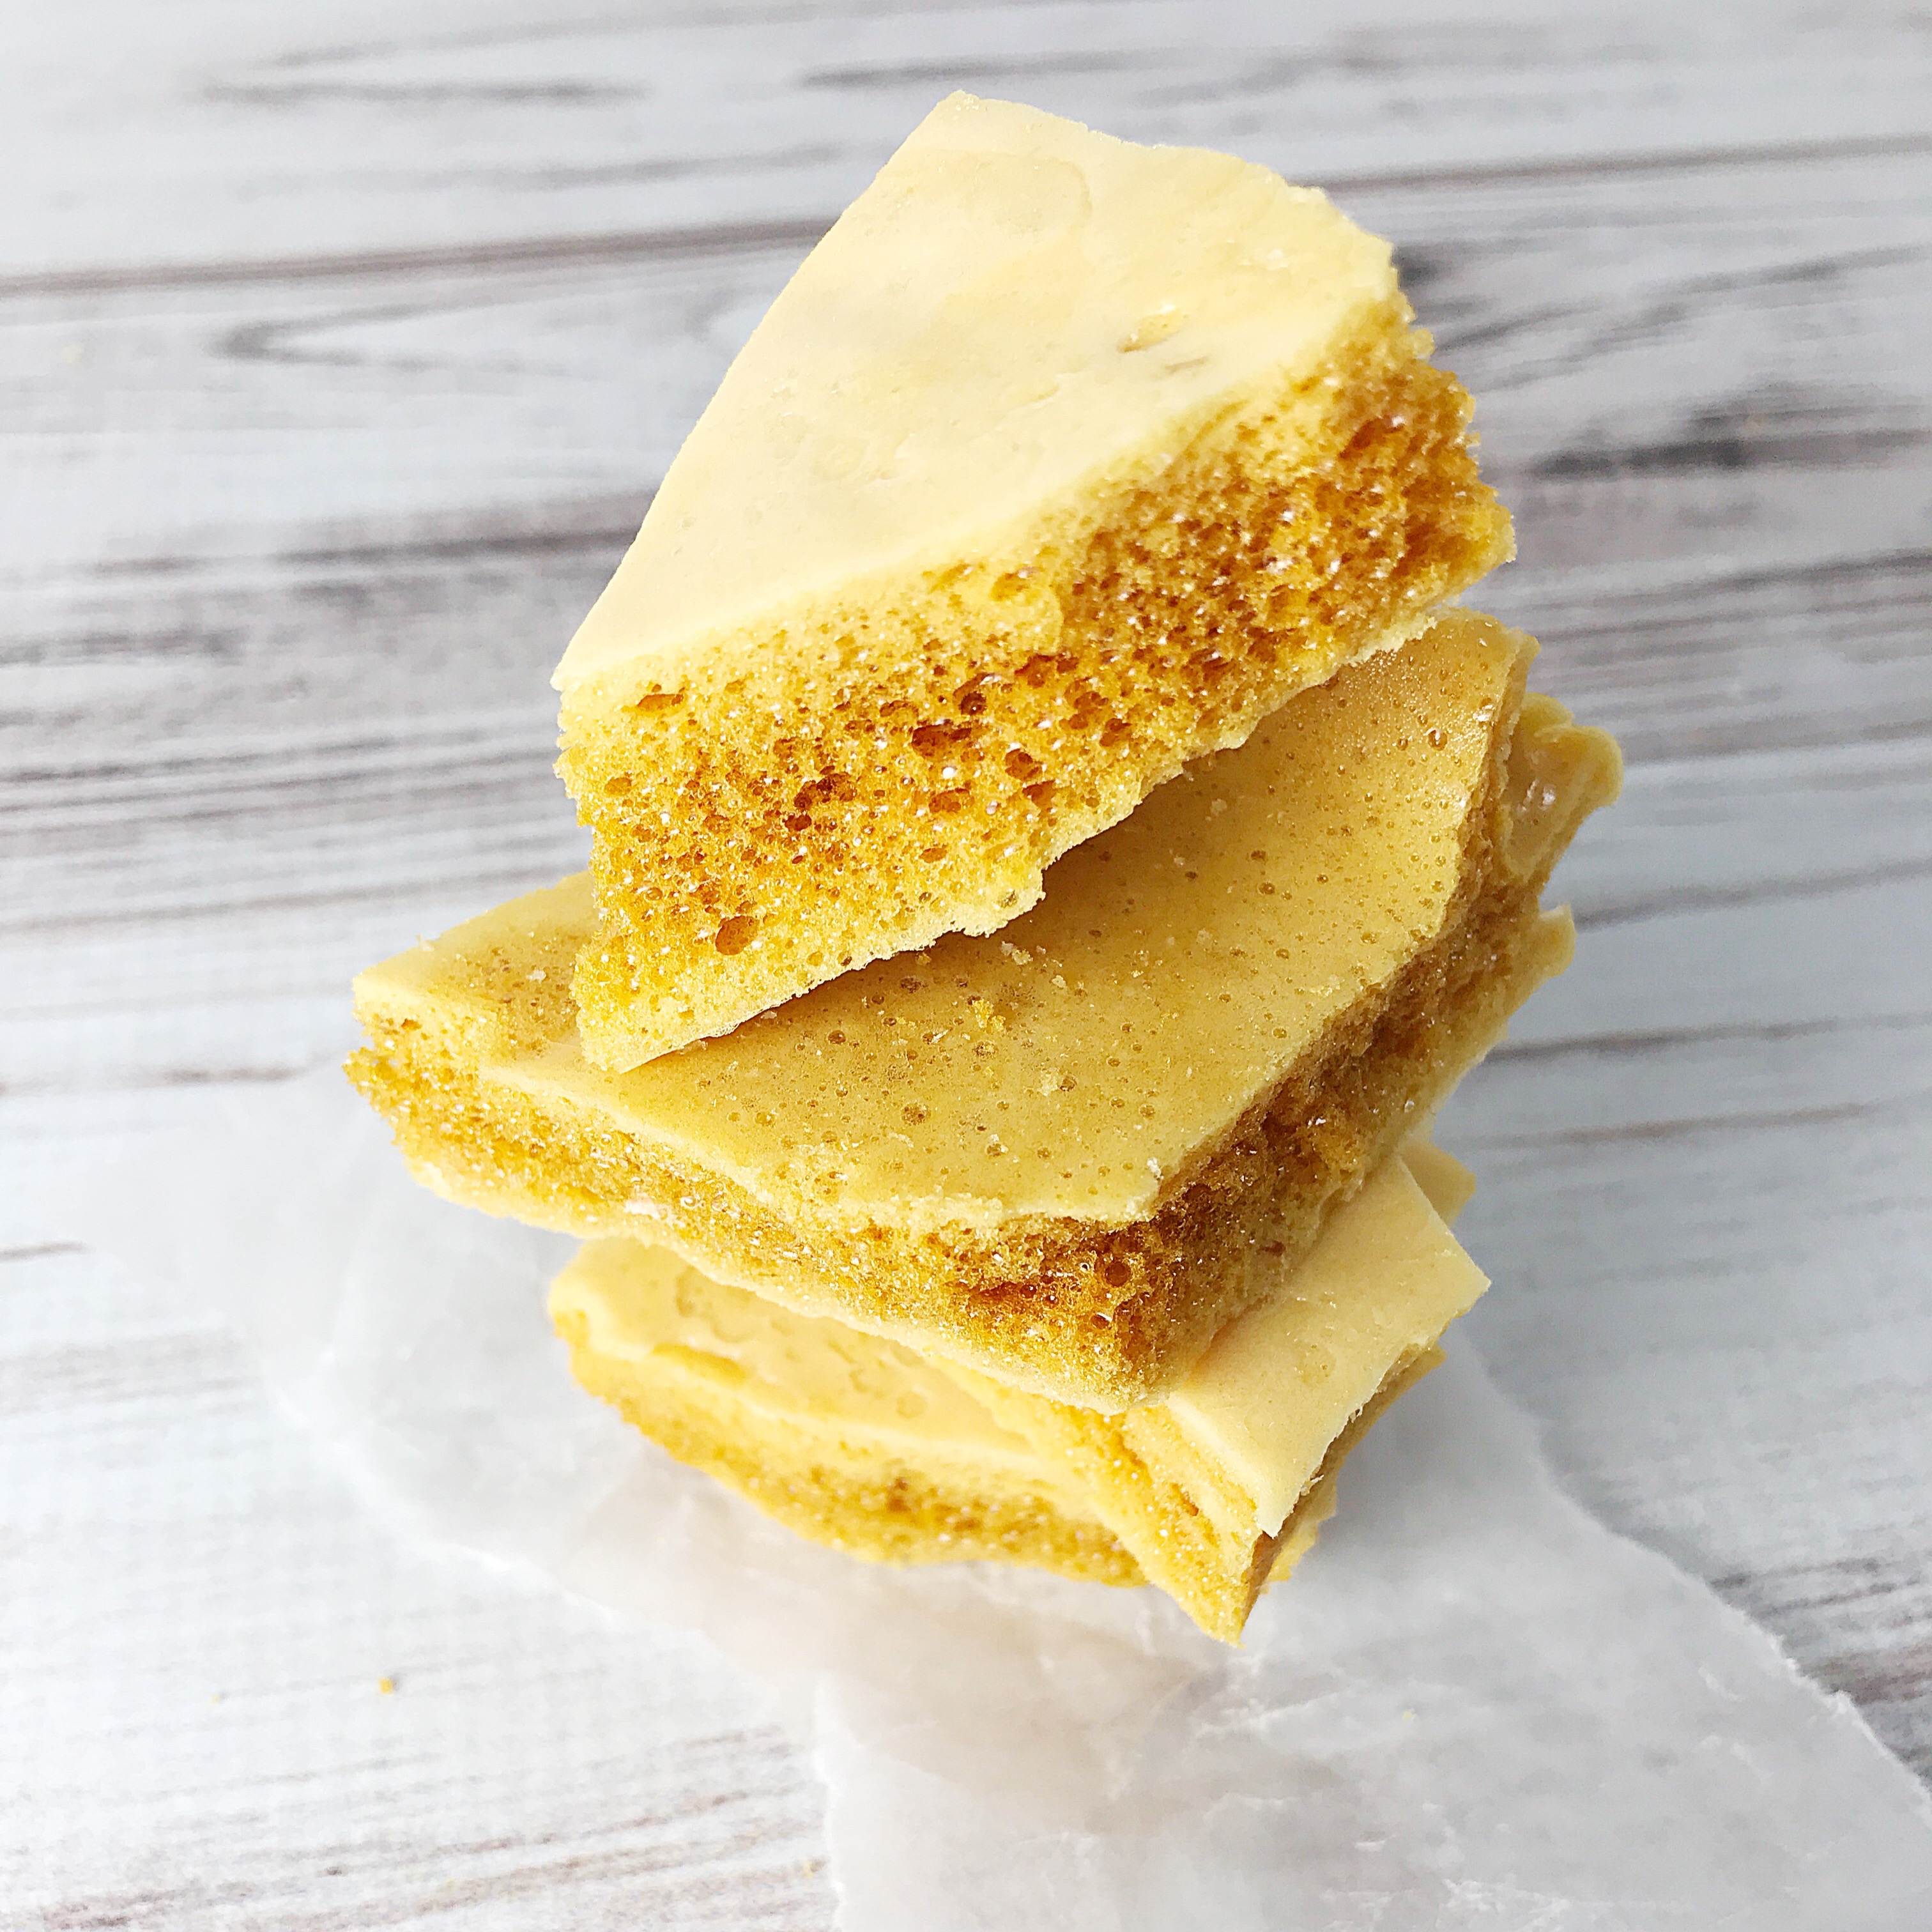 Homemade Honeycomb Candy